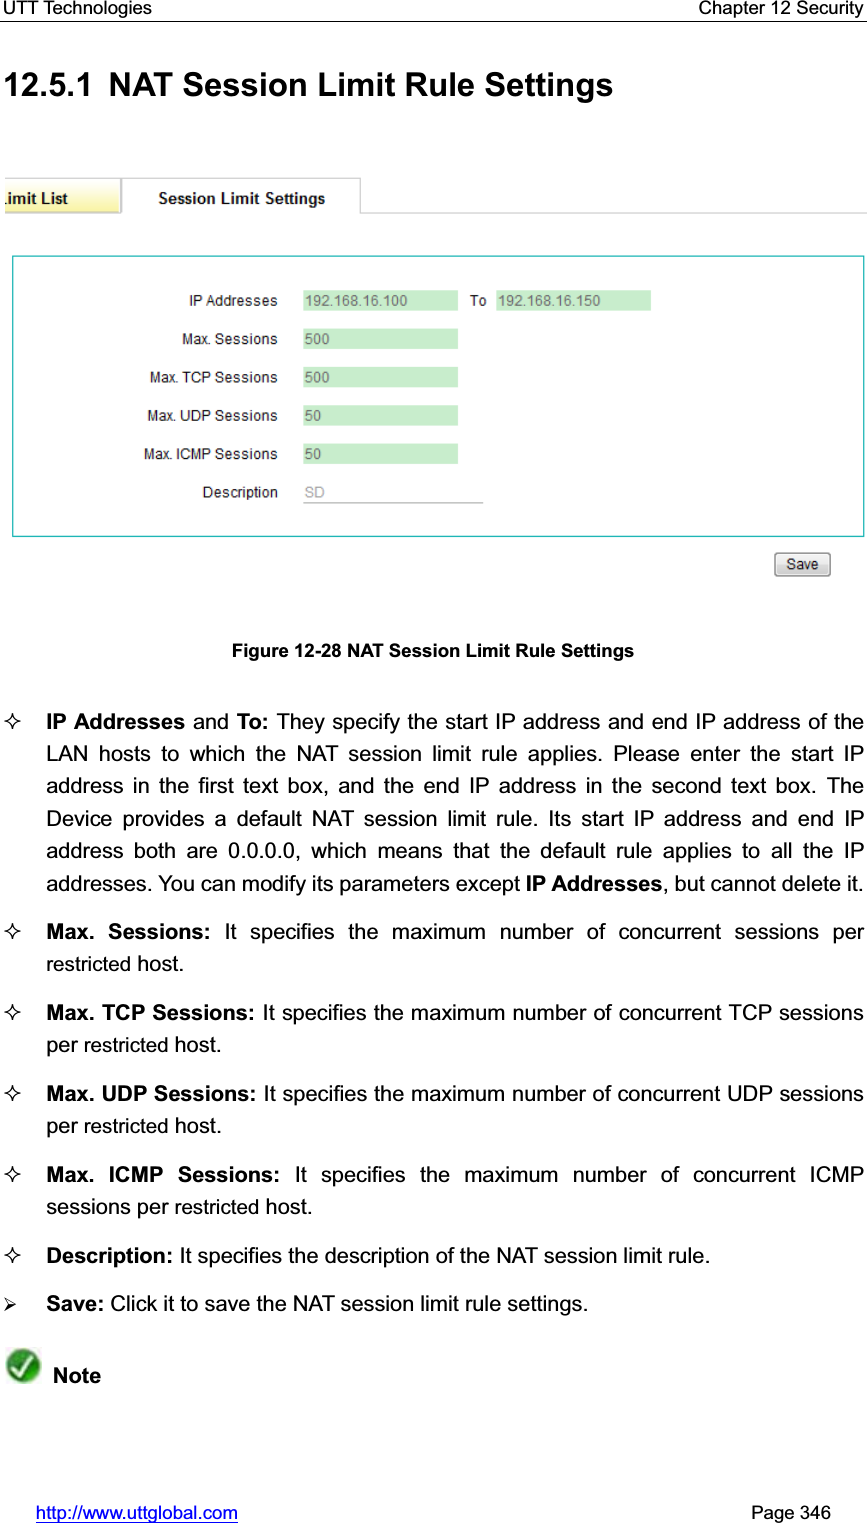 UTT Technologies    Chapter 12 Security   http://www.uttglobal.com                                                       Page 346 12.5.1  NAT Session Limit Rule Settings Figure 12-28 NAT Session Limit Rule Settings IP Addresses and To: They specify the start IP address and end IP address of the LAN hosts to which the NAT session limit rule applies. Please enter the start IP address in the first text box, and the end IP address in the second text box. The Device provides a default NAT session limit rule. Its start IP address and end IP address both are 0.0.0.0, which means that the default rule applies to all the IP addresses. You can modify its parameters except IP Addresses, but cannot delete it.   Max. Sessions: It specifies the maximum number of concurrent sessions per restricted host. Max. TCP Sessions: It specifies the maximum number of concurrent TCP sessions per restricted host.Max. UDP Sessions: It specifies the maximum number of concurrent UDP sessions per restricted host. Max. ICMP Sessions: It specifies the maximum number of concurrent ICMP sessions per restricted host.   Description: It specifies the description of the NAT session limit rule. ¾Save: Click it to save the NAT session limit rule settings.Note